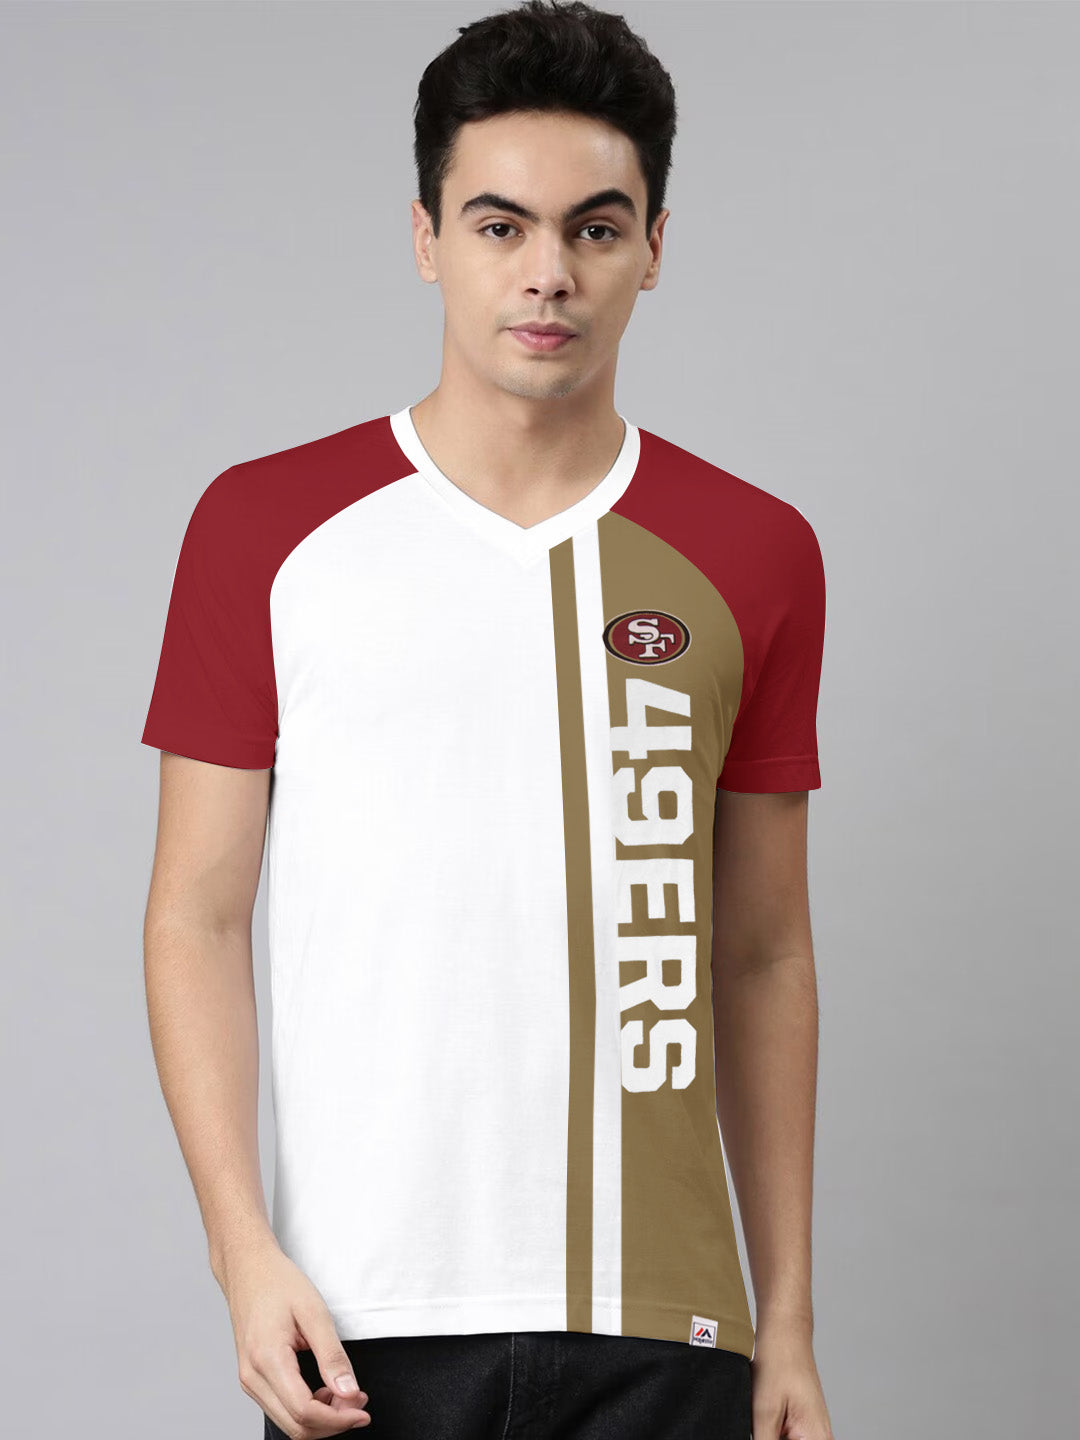 Magestic Single Jersey V Neck Tee Shirt For Men-White with Red & Golden-BE1137